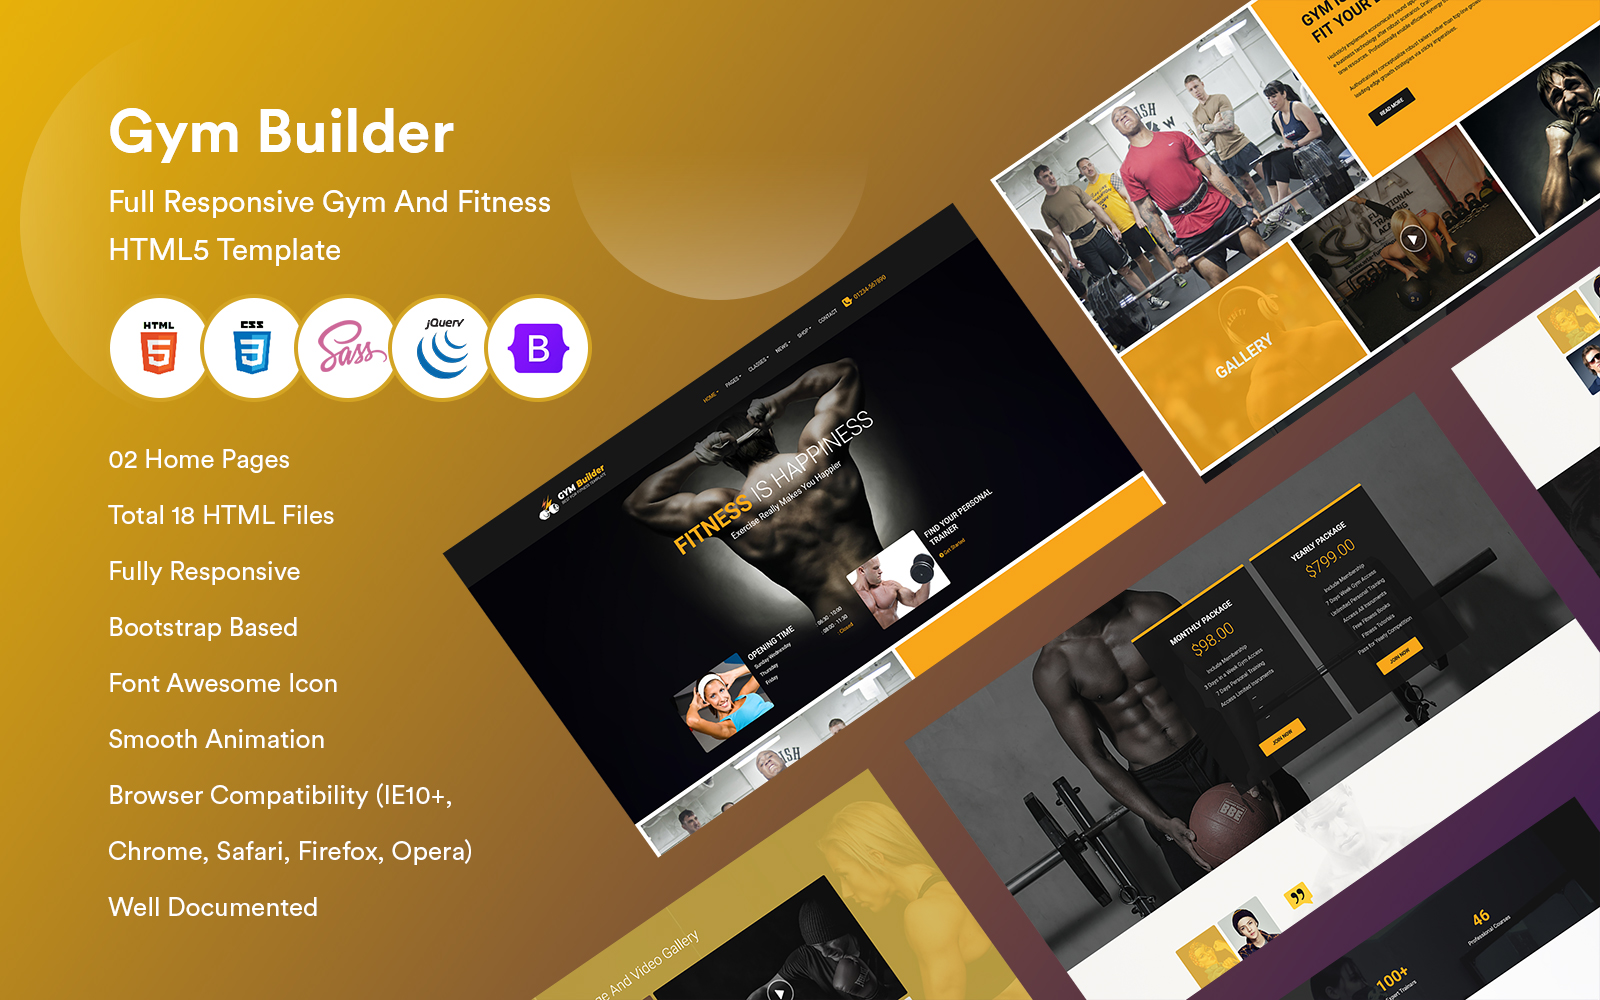 GymBuilder - Responsive Gym & Fitness HTML Template